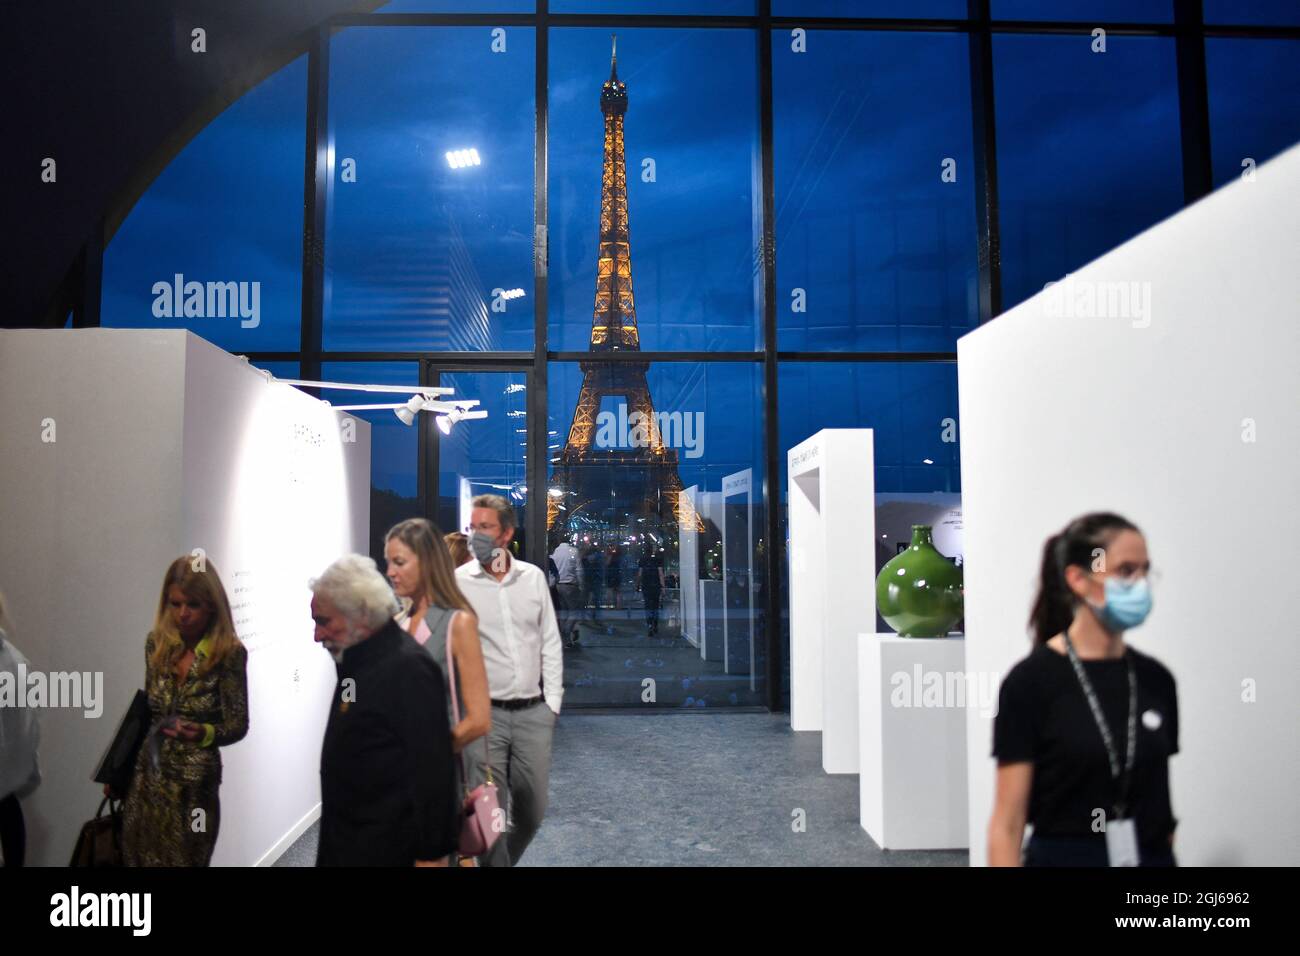 A view of the Art Paris fair held at Le Grand Palais Ephemere on September 8, 2021 in Paris, France. For the first time, Art Paris Art Fair marks the start of the new art year. The contemporary art fair, which is usually held in the spring, starts on Thursday and is held in the ephemeral Grand Palais, a new structure designed by architect Jean-Michel Wilmotte on the Champ-de-Mars. For its 23rd edition, it hosts 140 galleries, which offers a glimpse of the work of over 900 artists. As in previous years, the event provides an opportunity to (re)discover a broad panorama of modern and contemporar Stock Photo